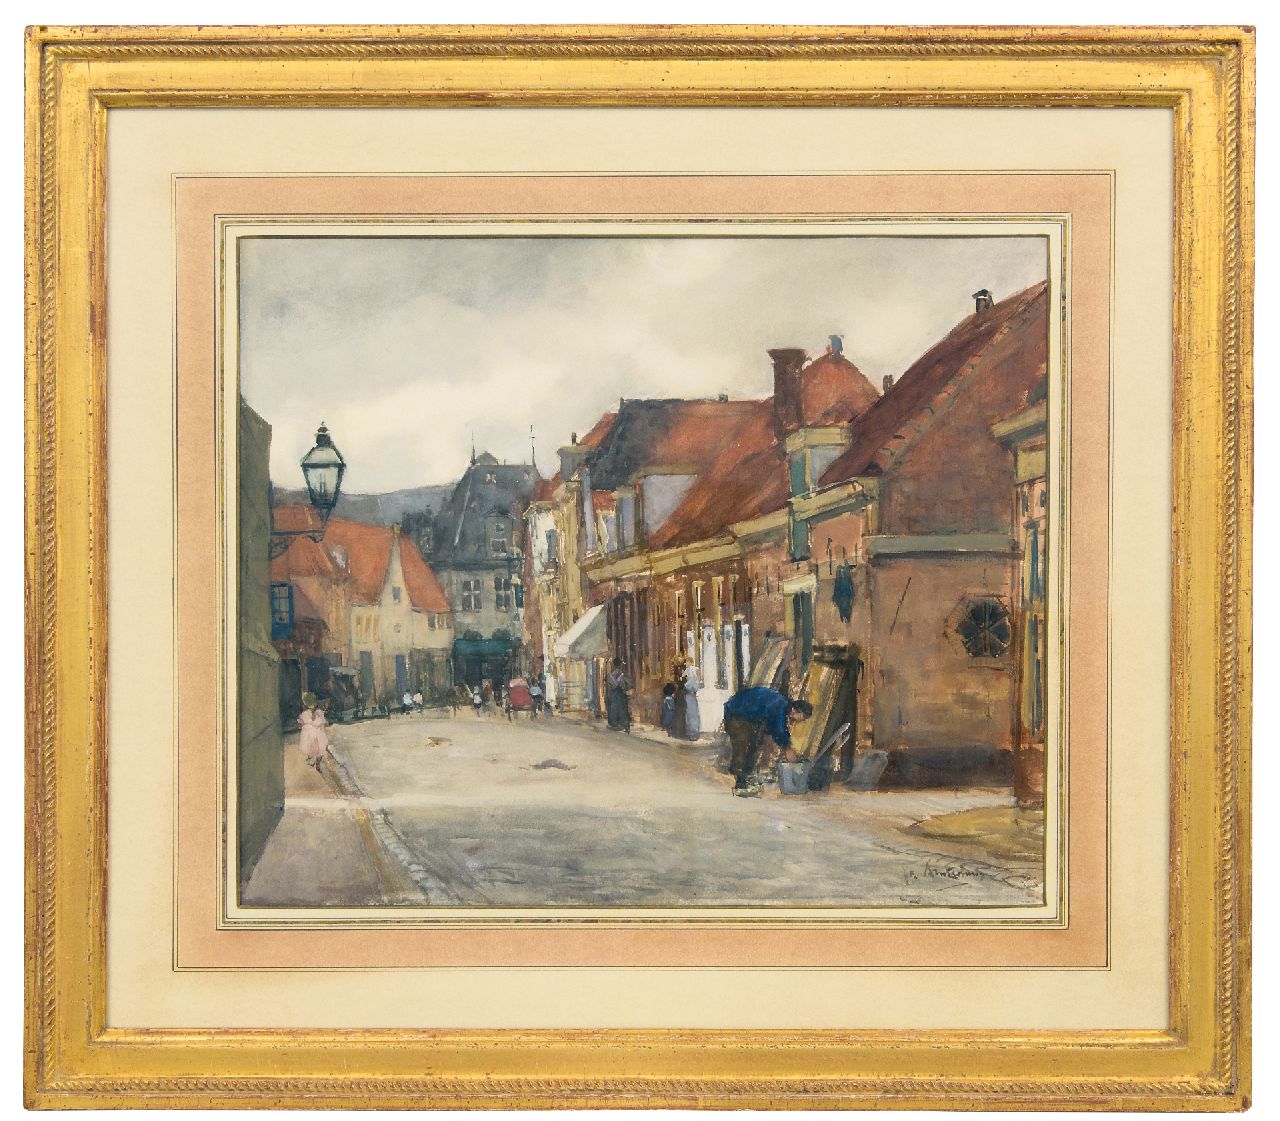 Arntzenius P.F.N.J.  | Pieter Florentius Nicolaas Jacobus 'Floris' Arntzenius | Watercolours and drawings offered for sale | A street in Hoorn with a view of the Kaaswaag, watercolour on paper 39.0 x 46.5 cm, signed l.r. and to be dated 18 August 1905